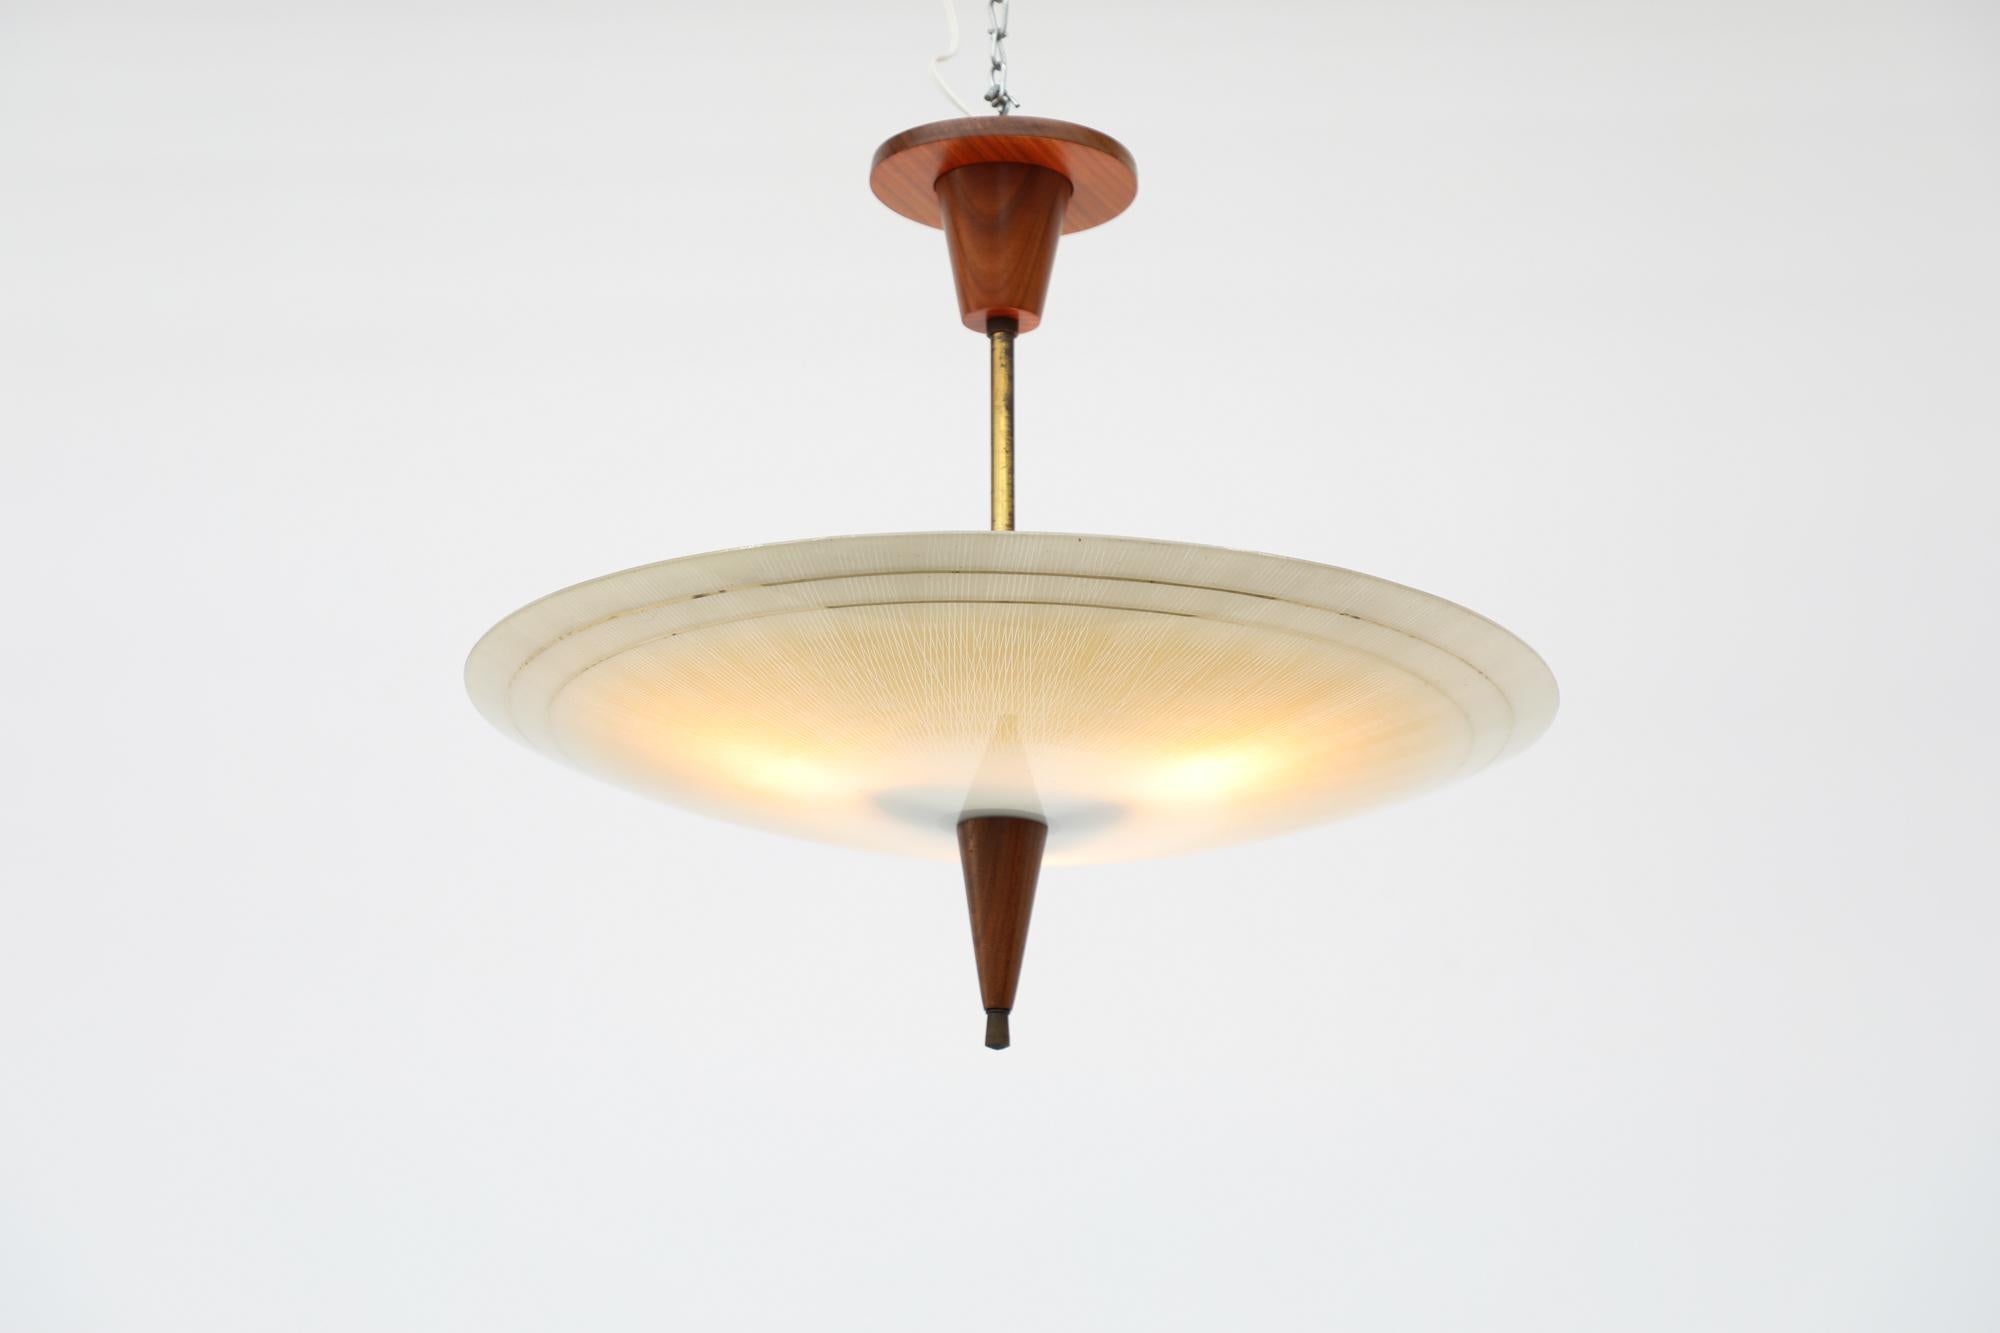 Mid-Century Modern 1950s Glass Rondelle Ceiling Pendant with Patterned Glass, Teak & Brass Details